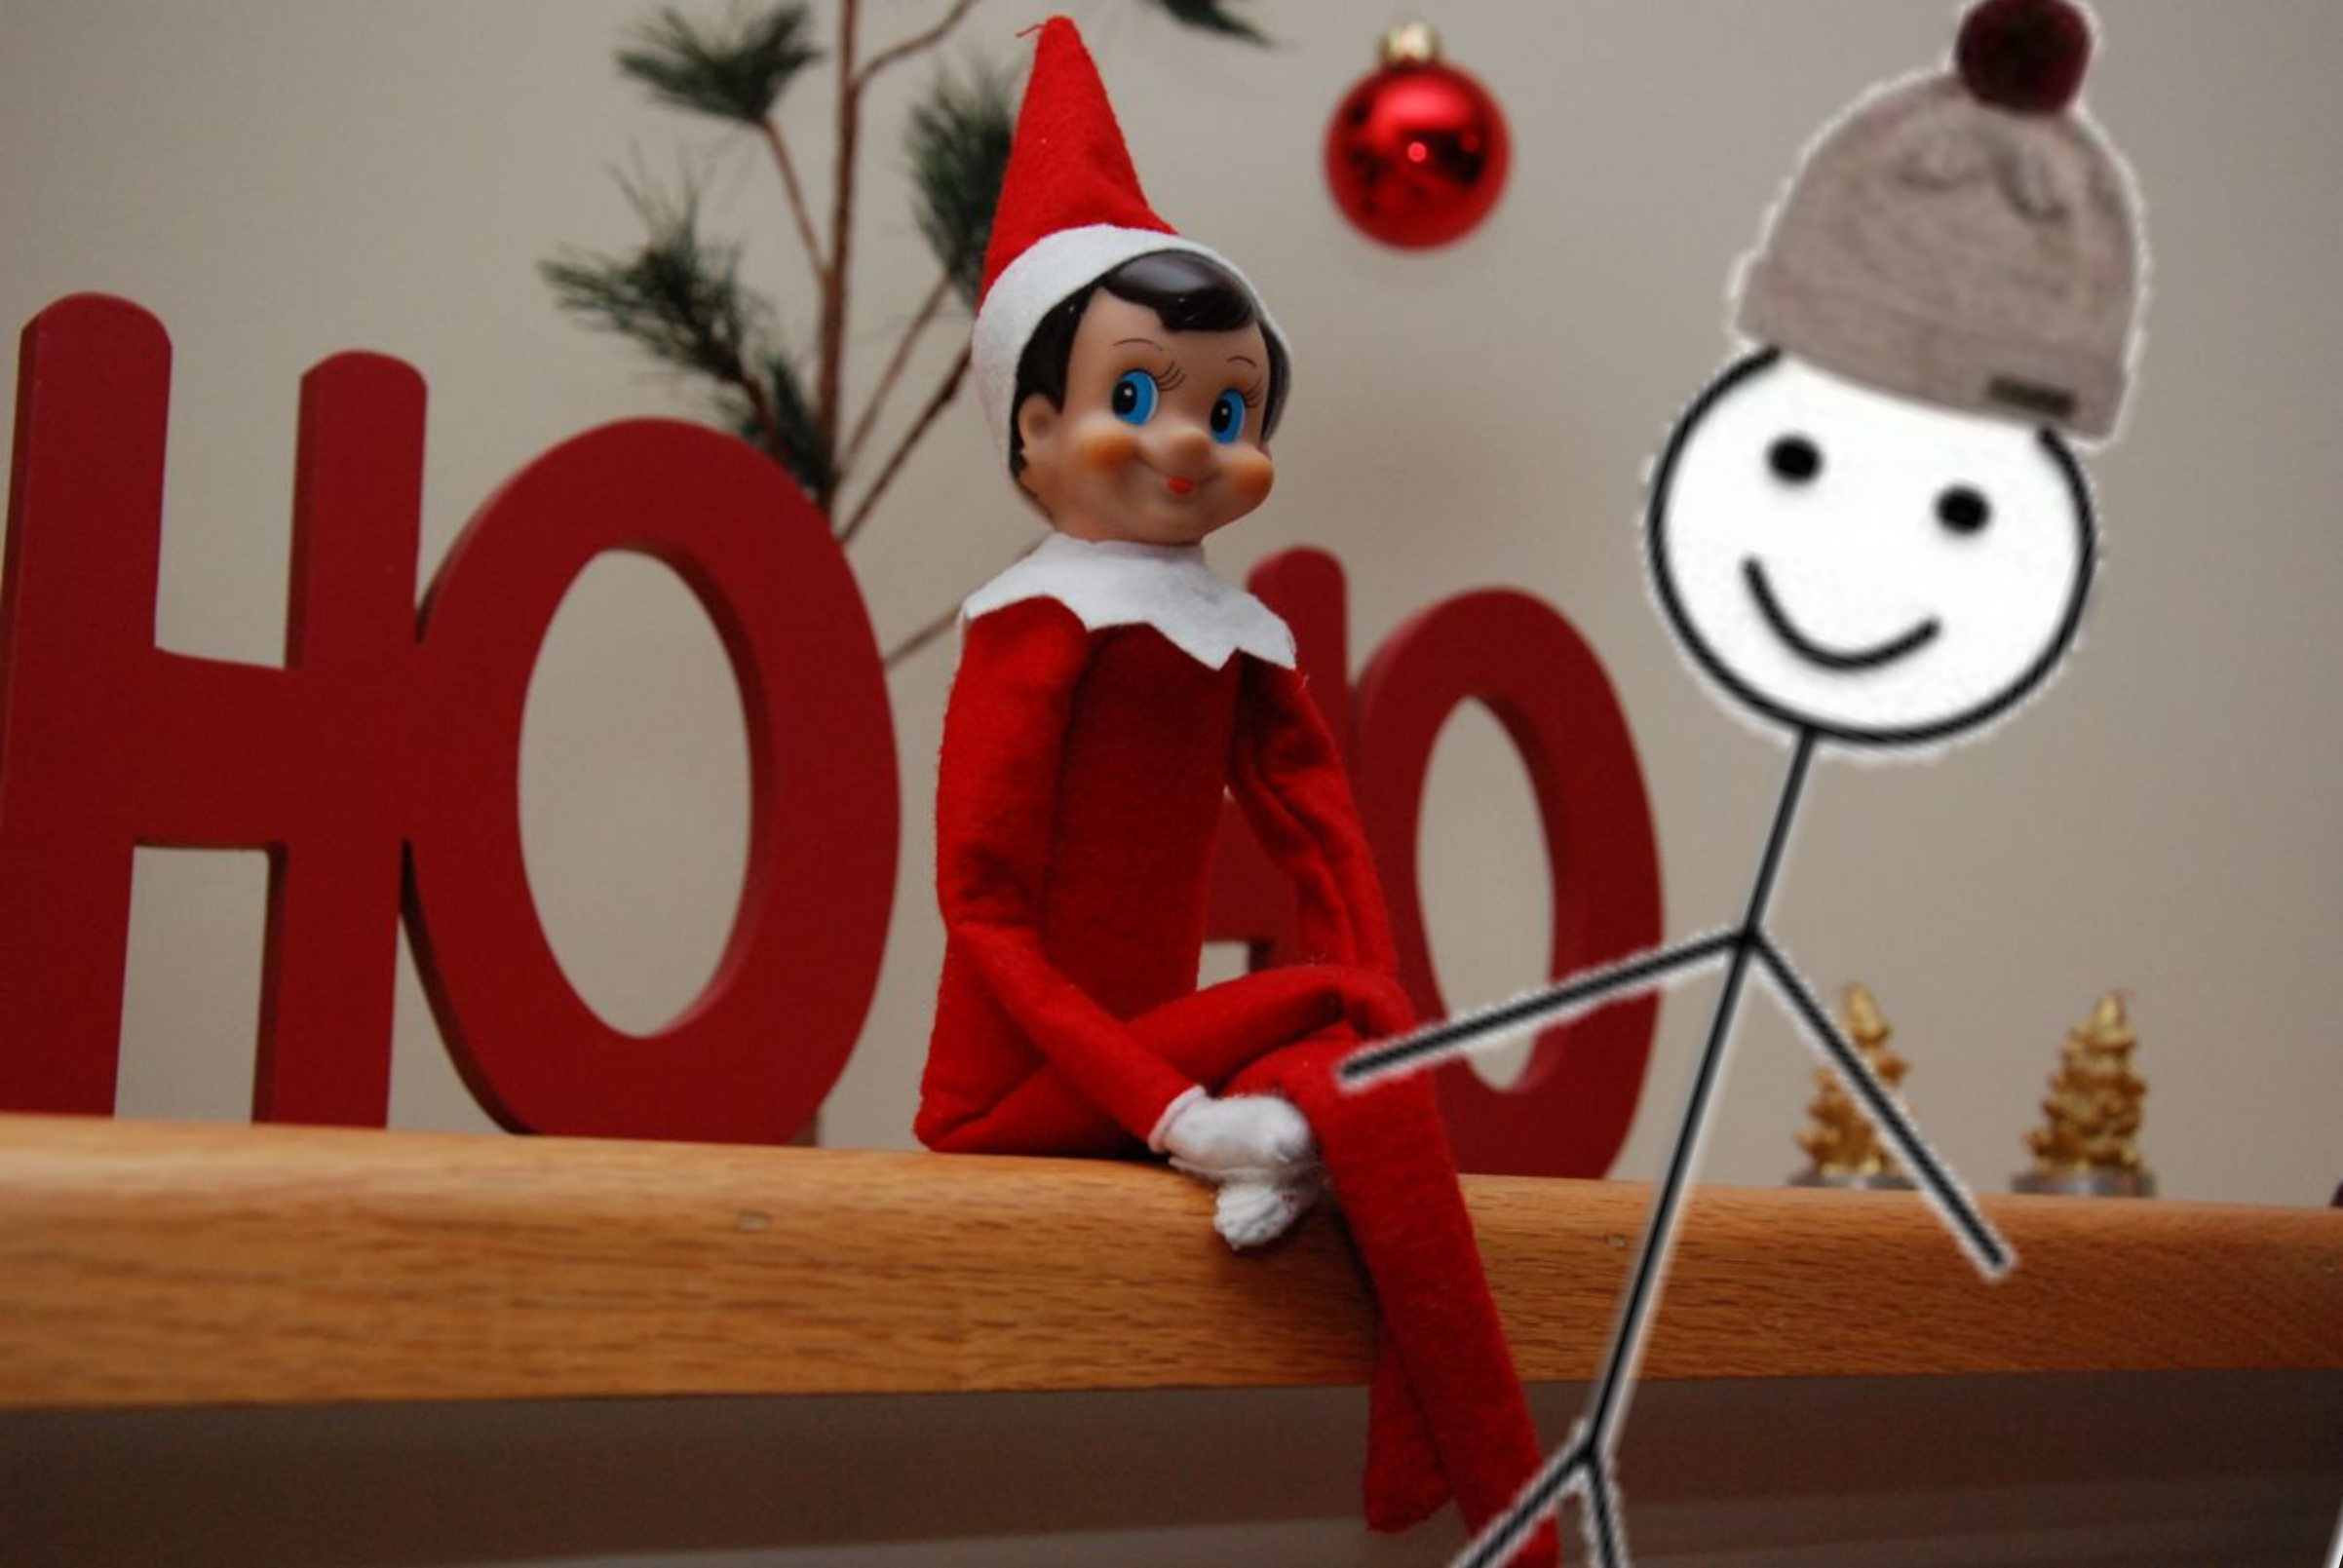 Be like Bob and forget about elf on a shelf